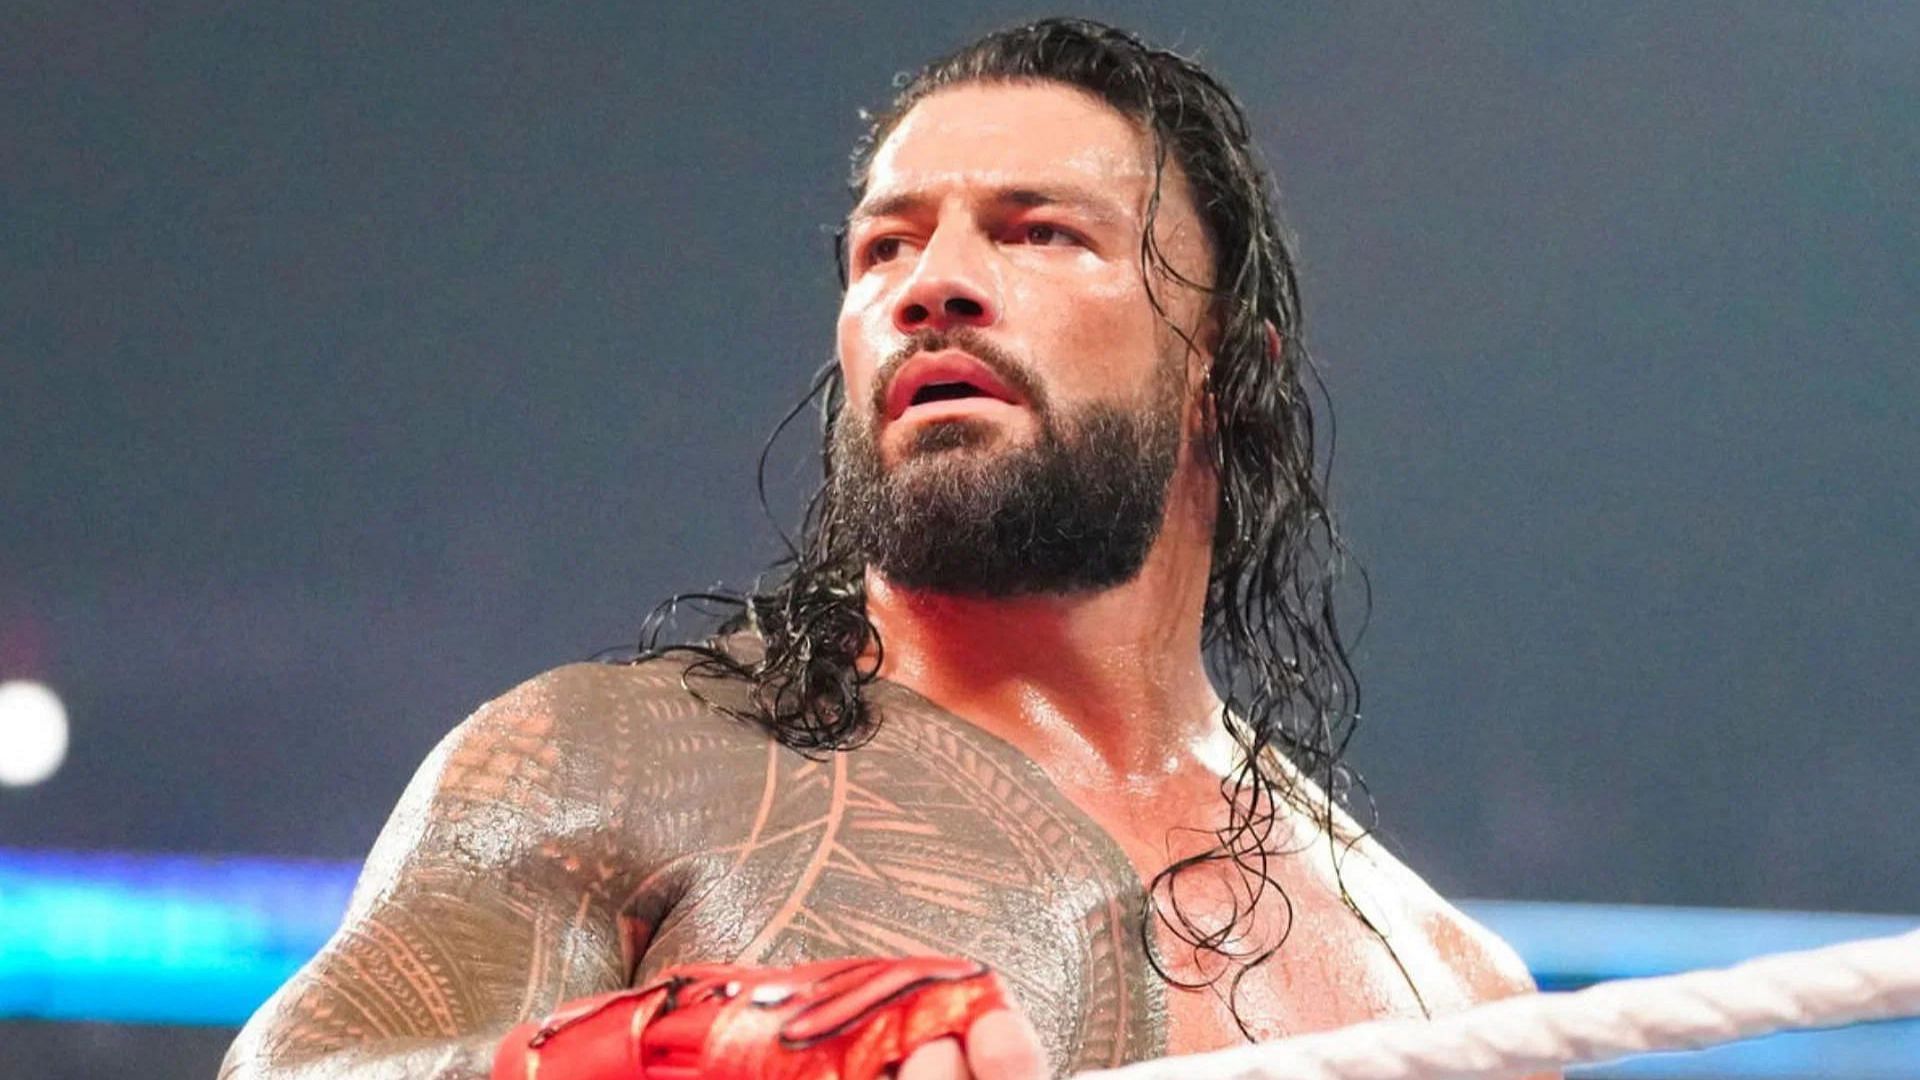 Roman Reigns has been put on notice by a WWE star